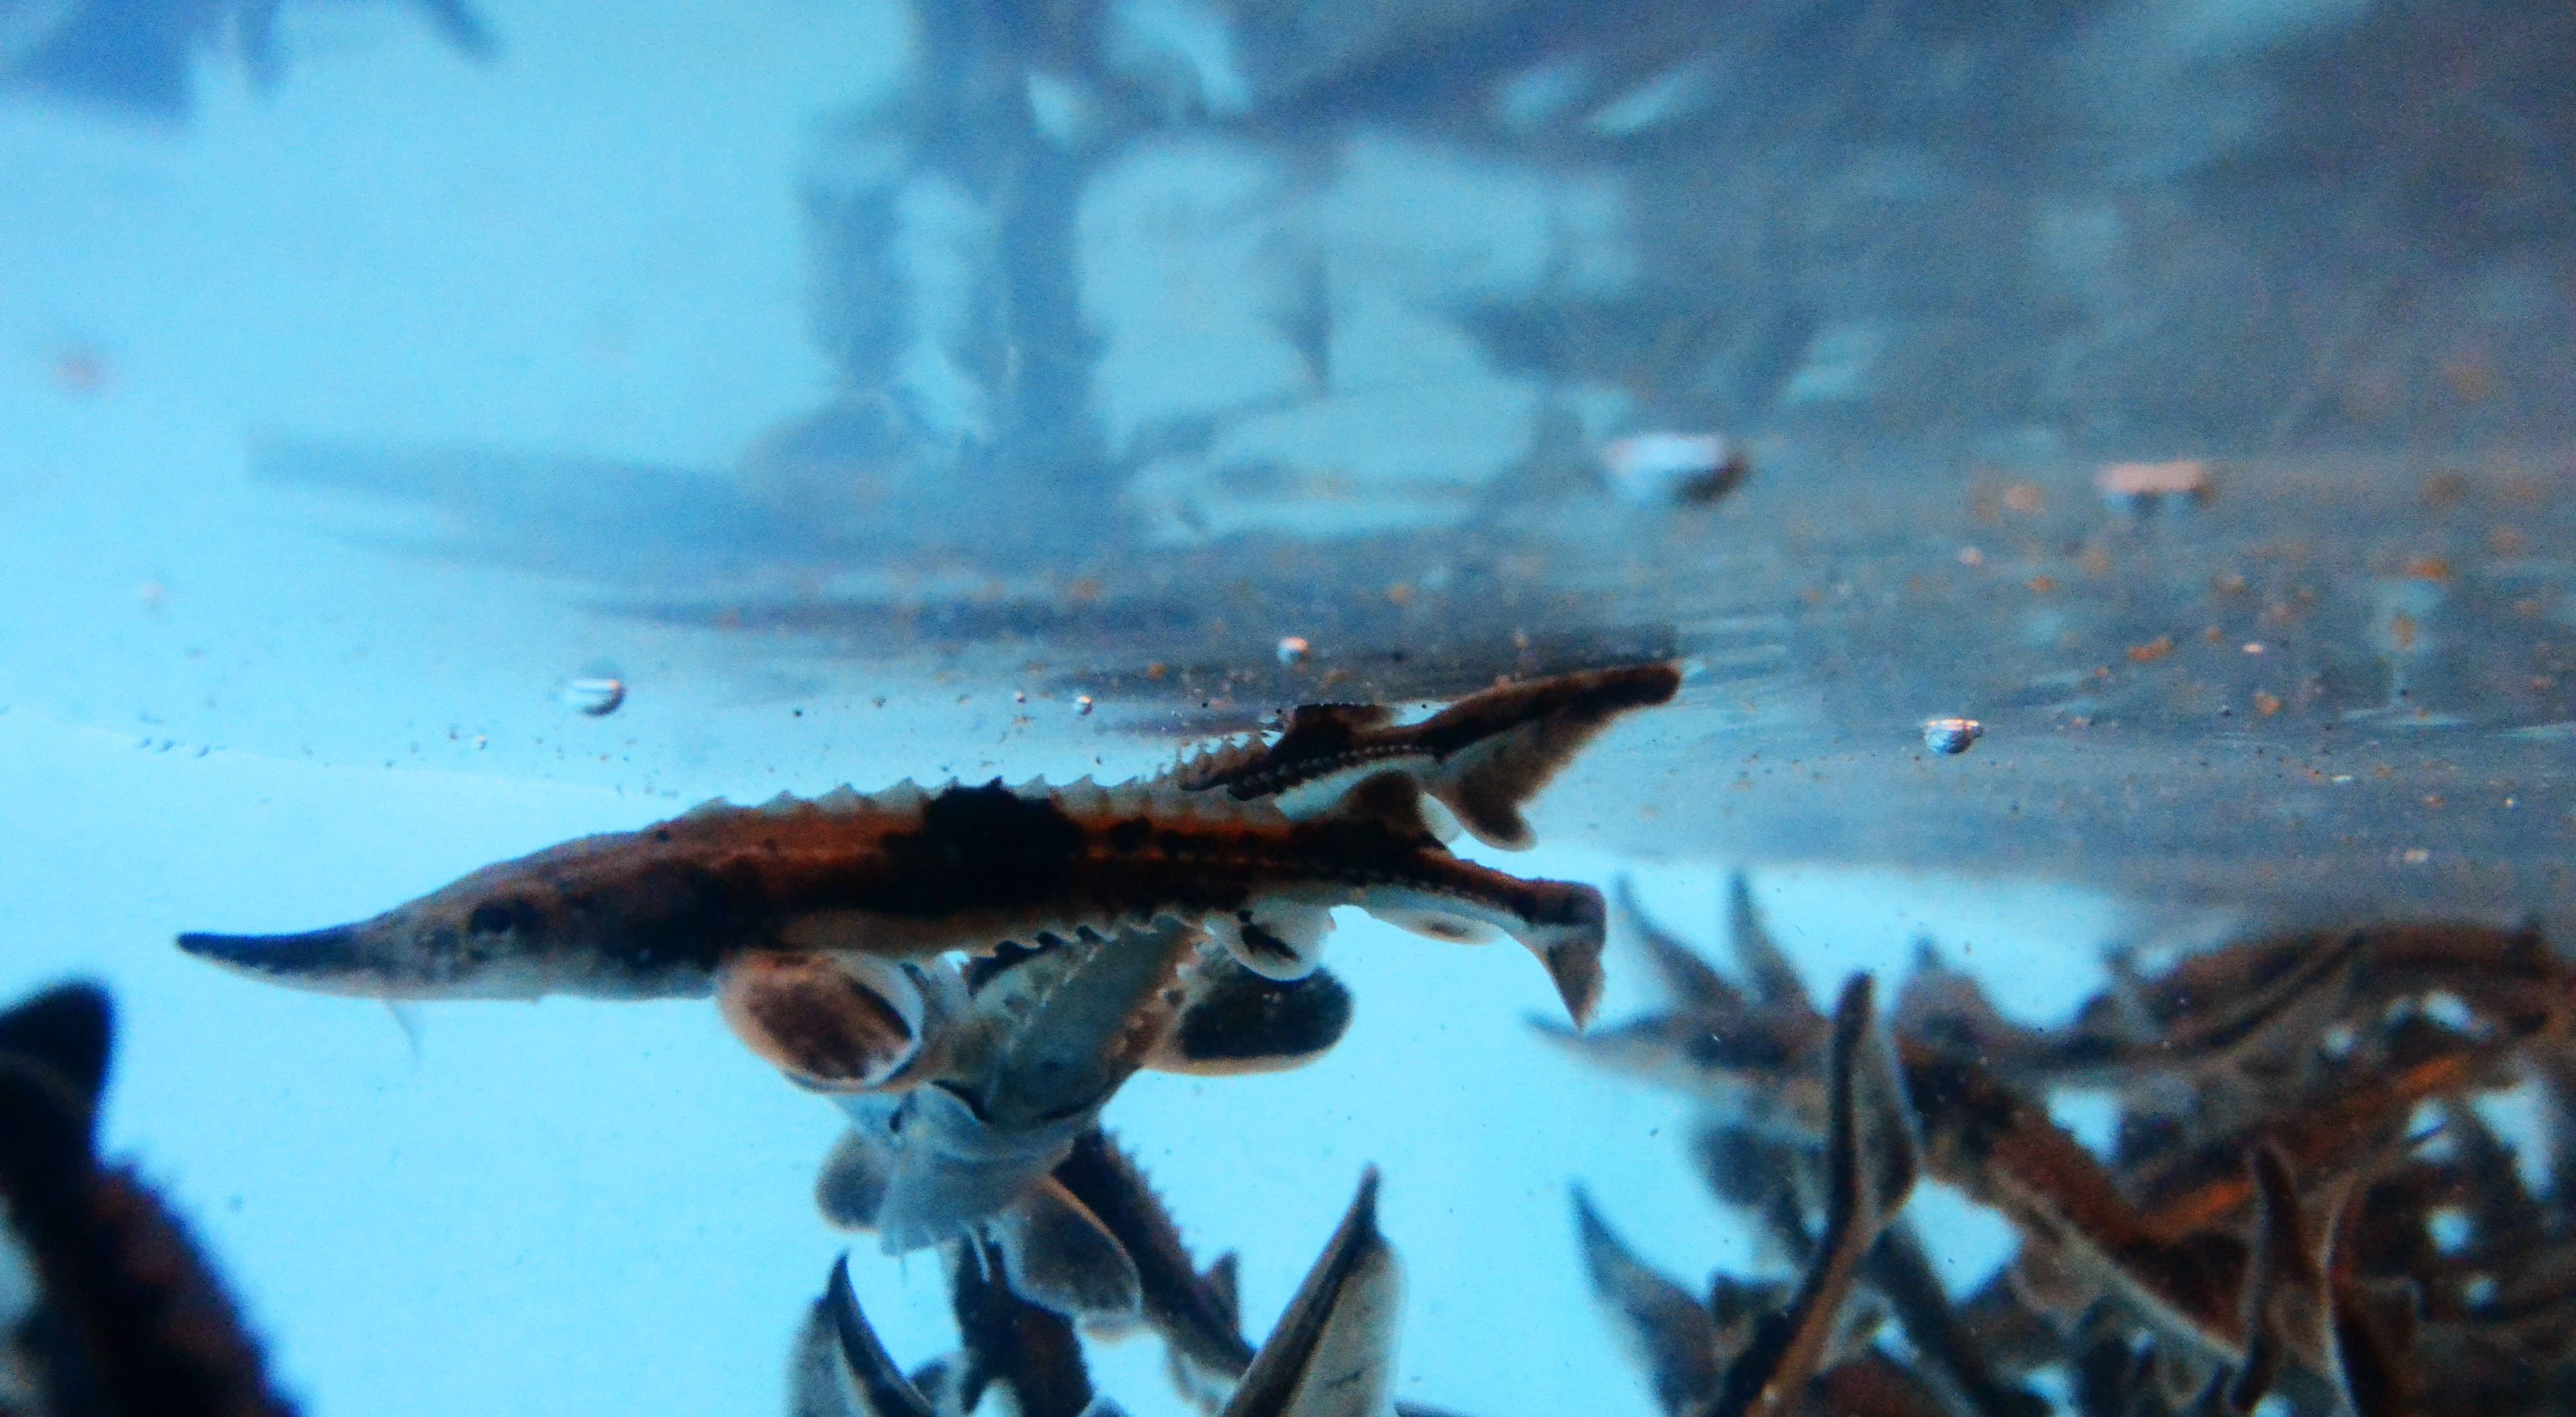 underwater view of small brown fish in a tank